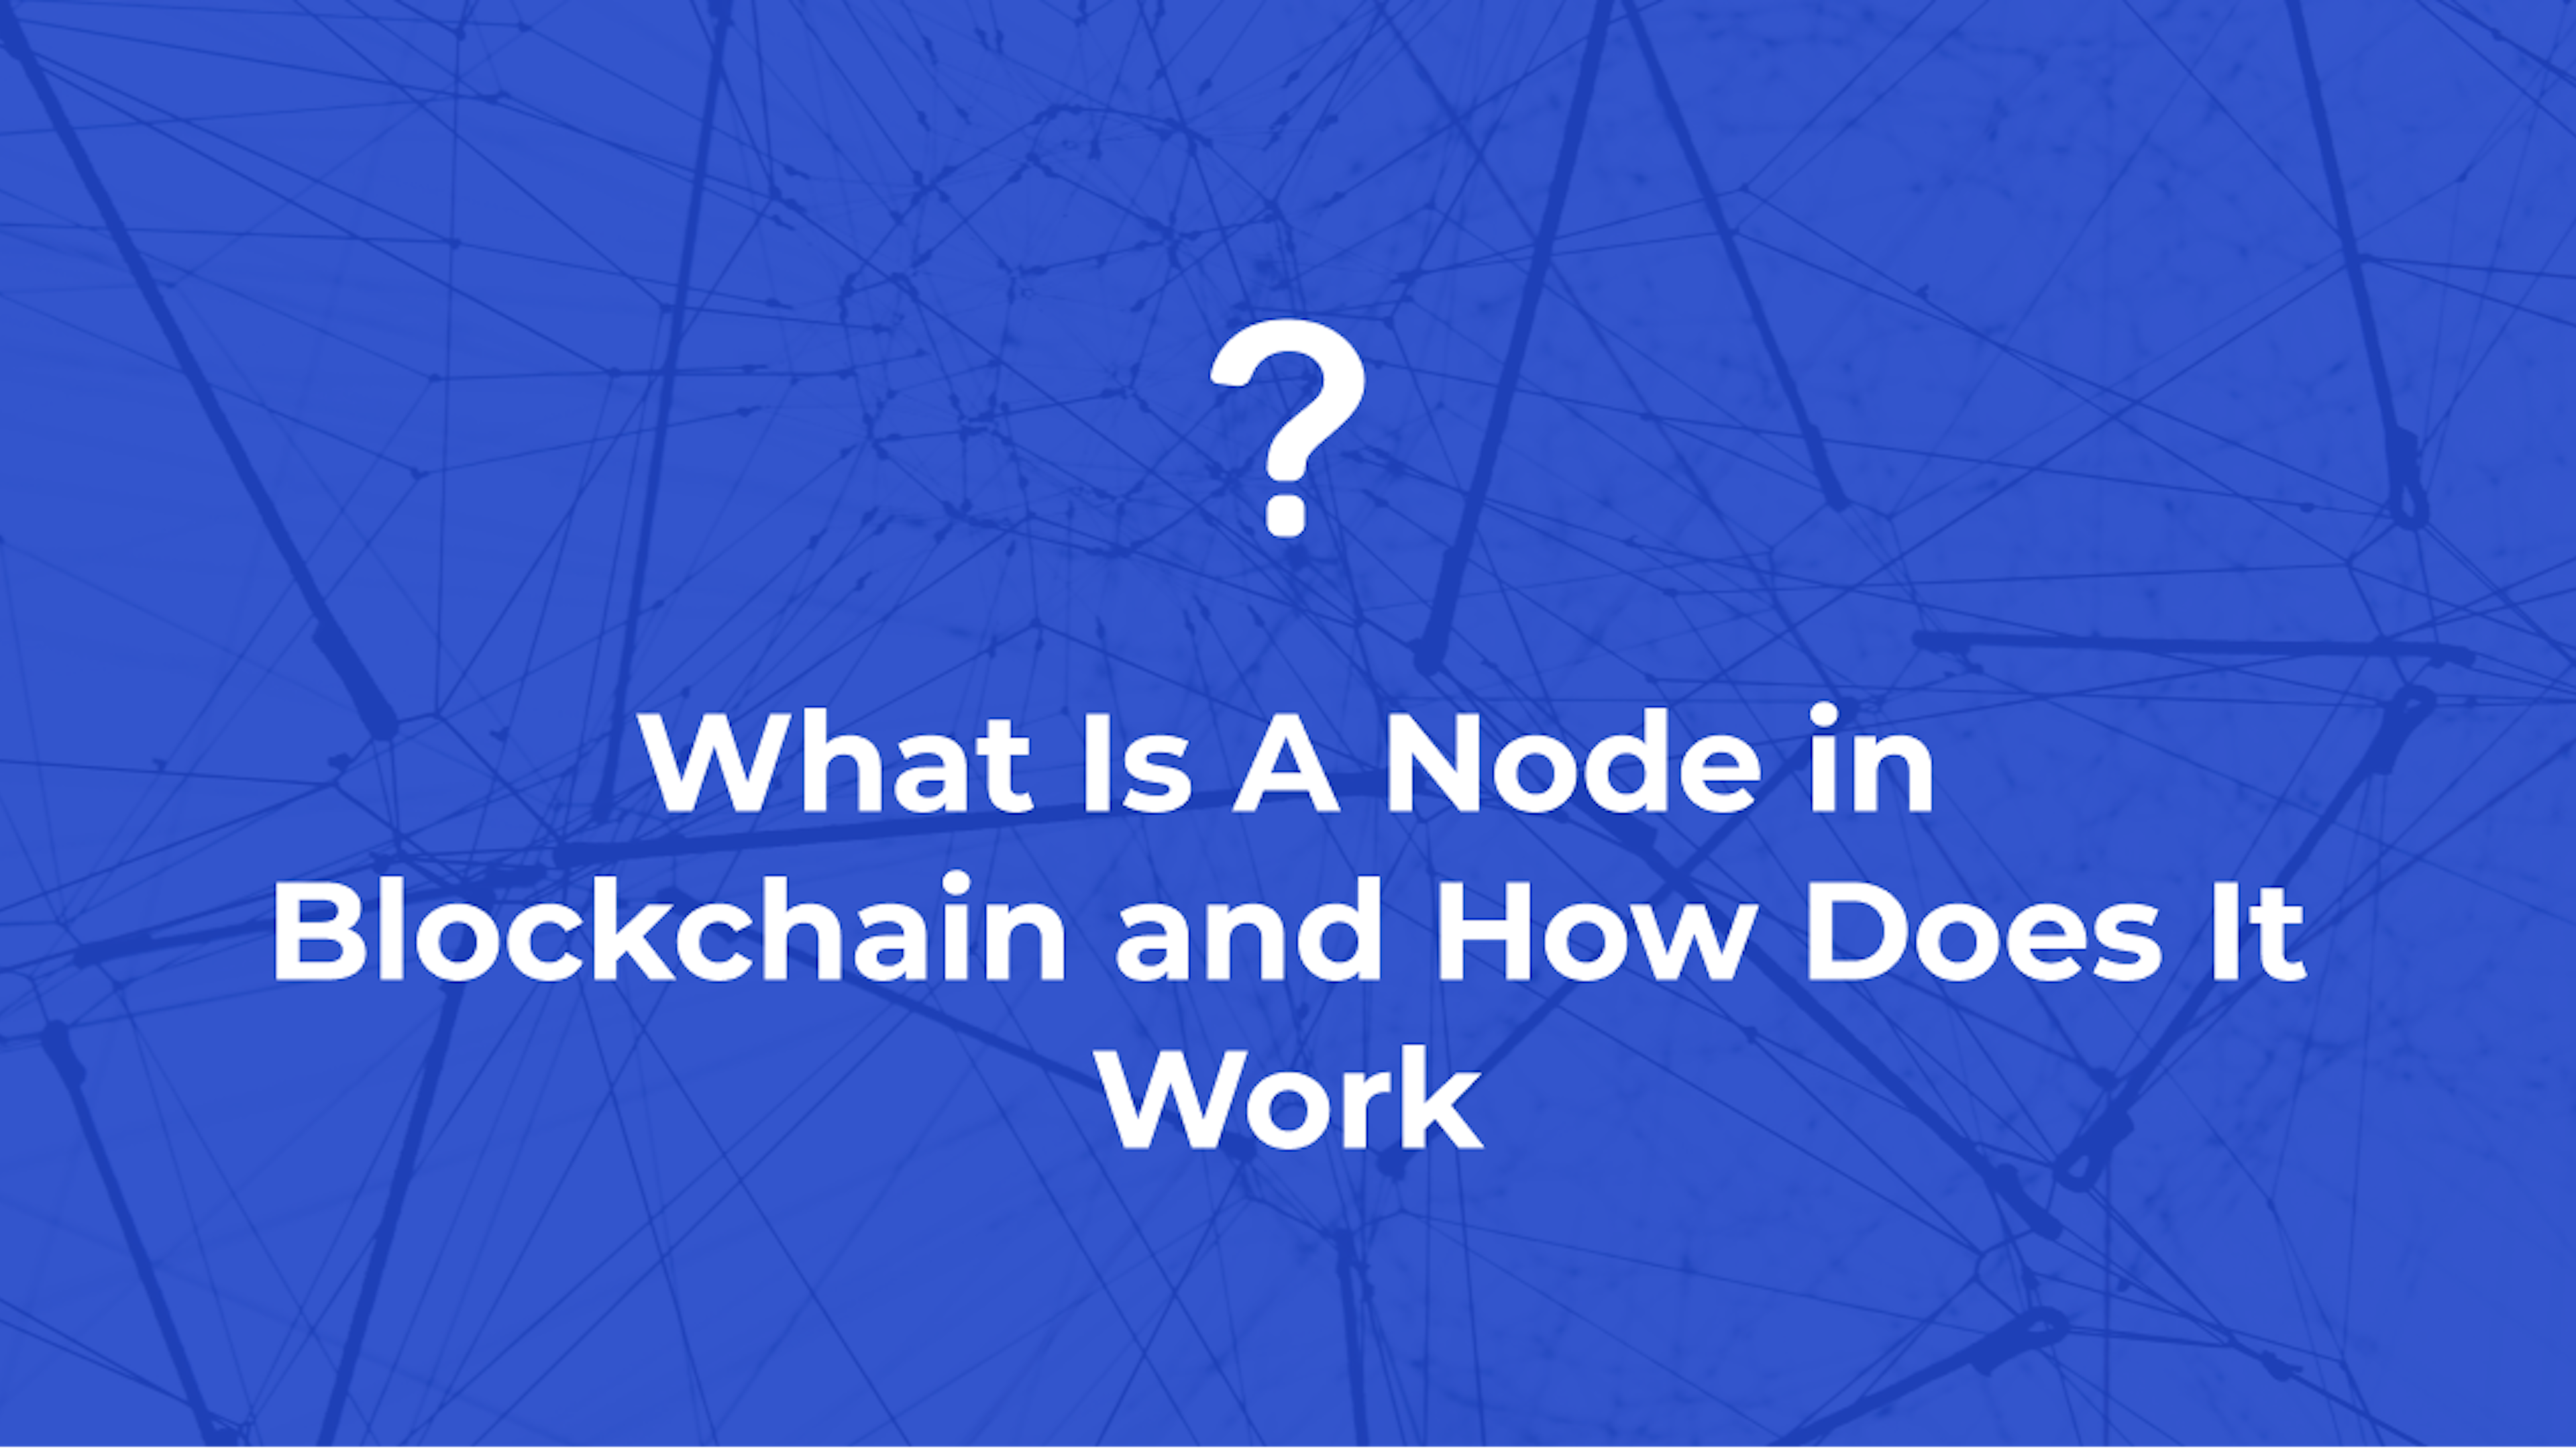 What Is A Node in Blockchain and How Does It Work?